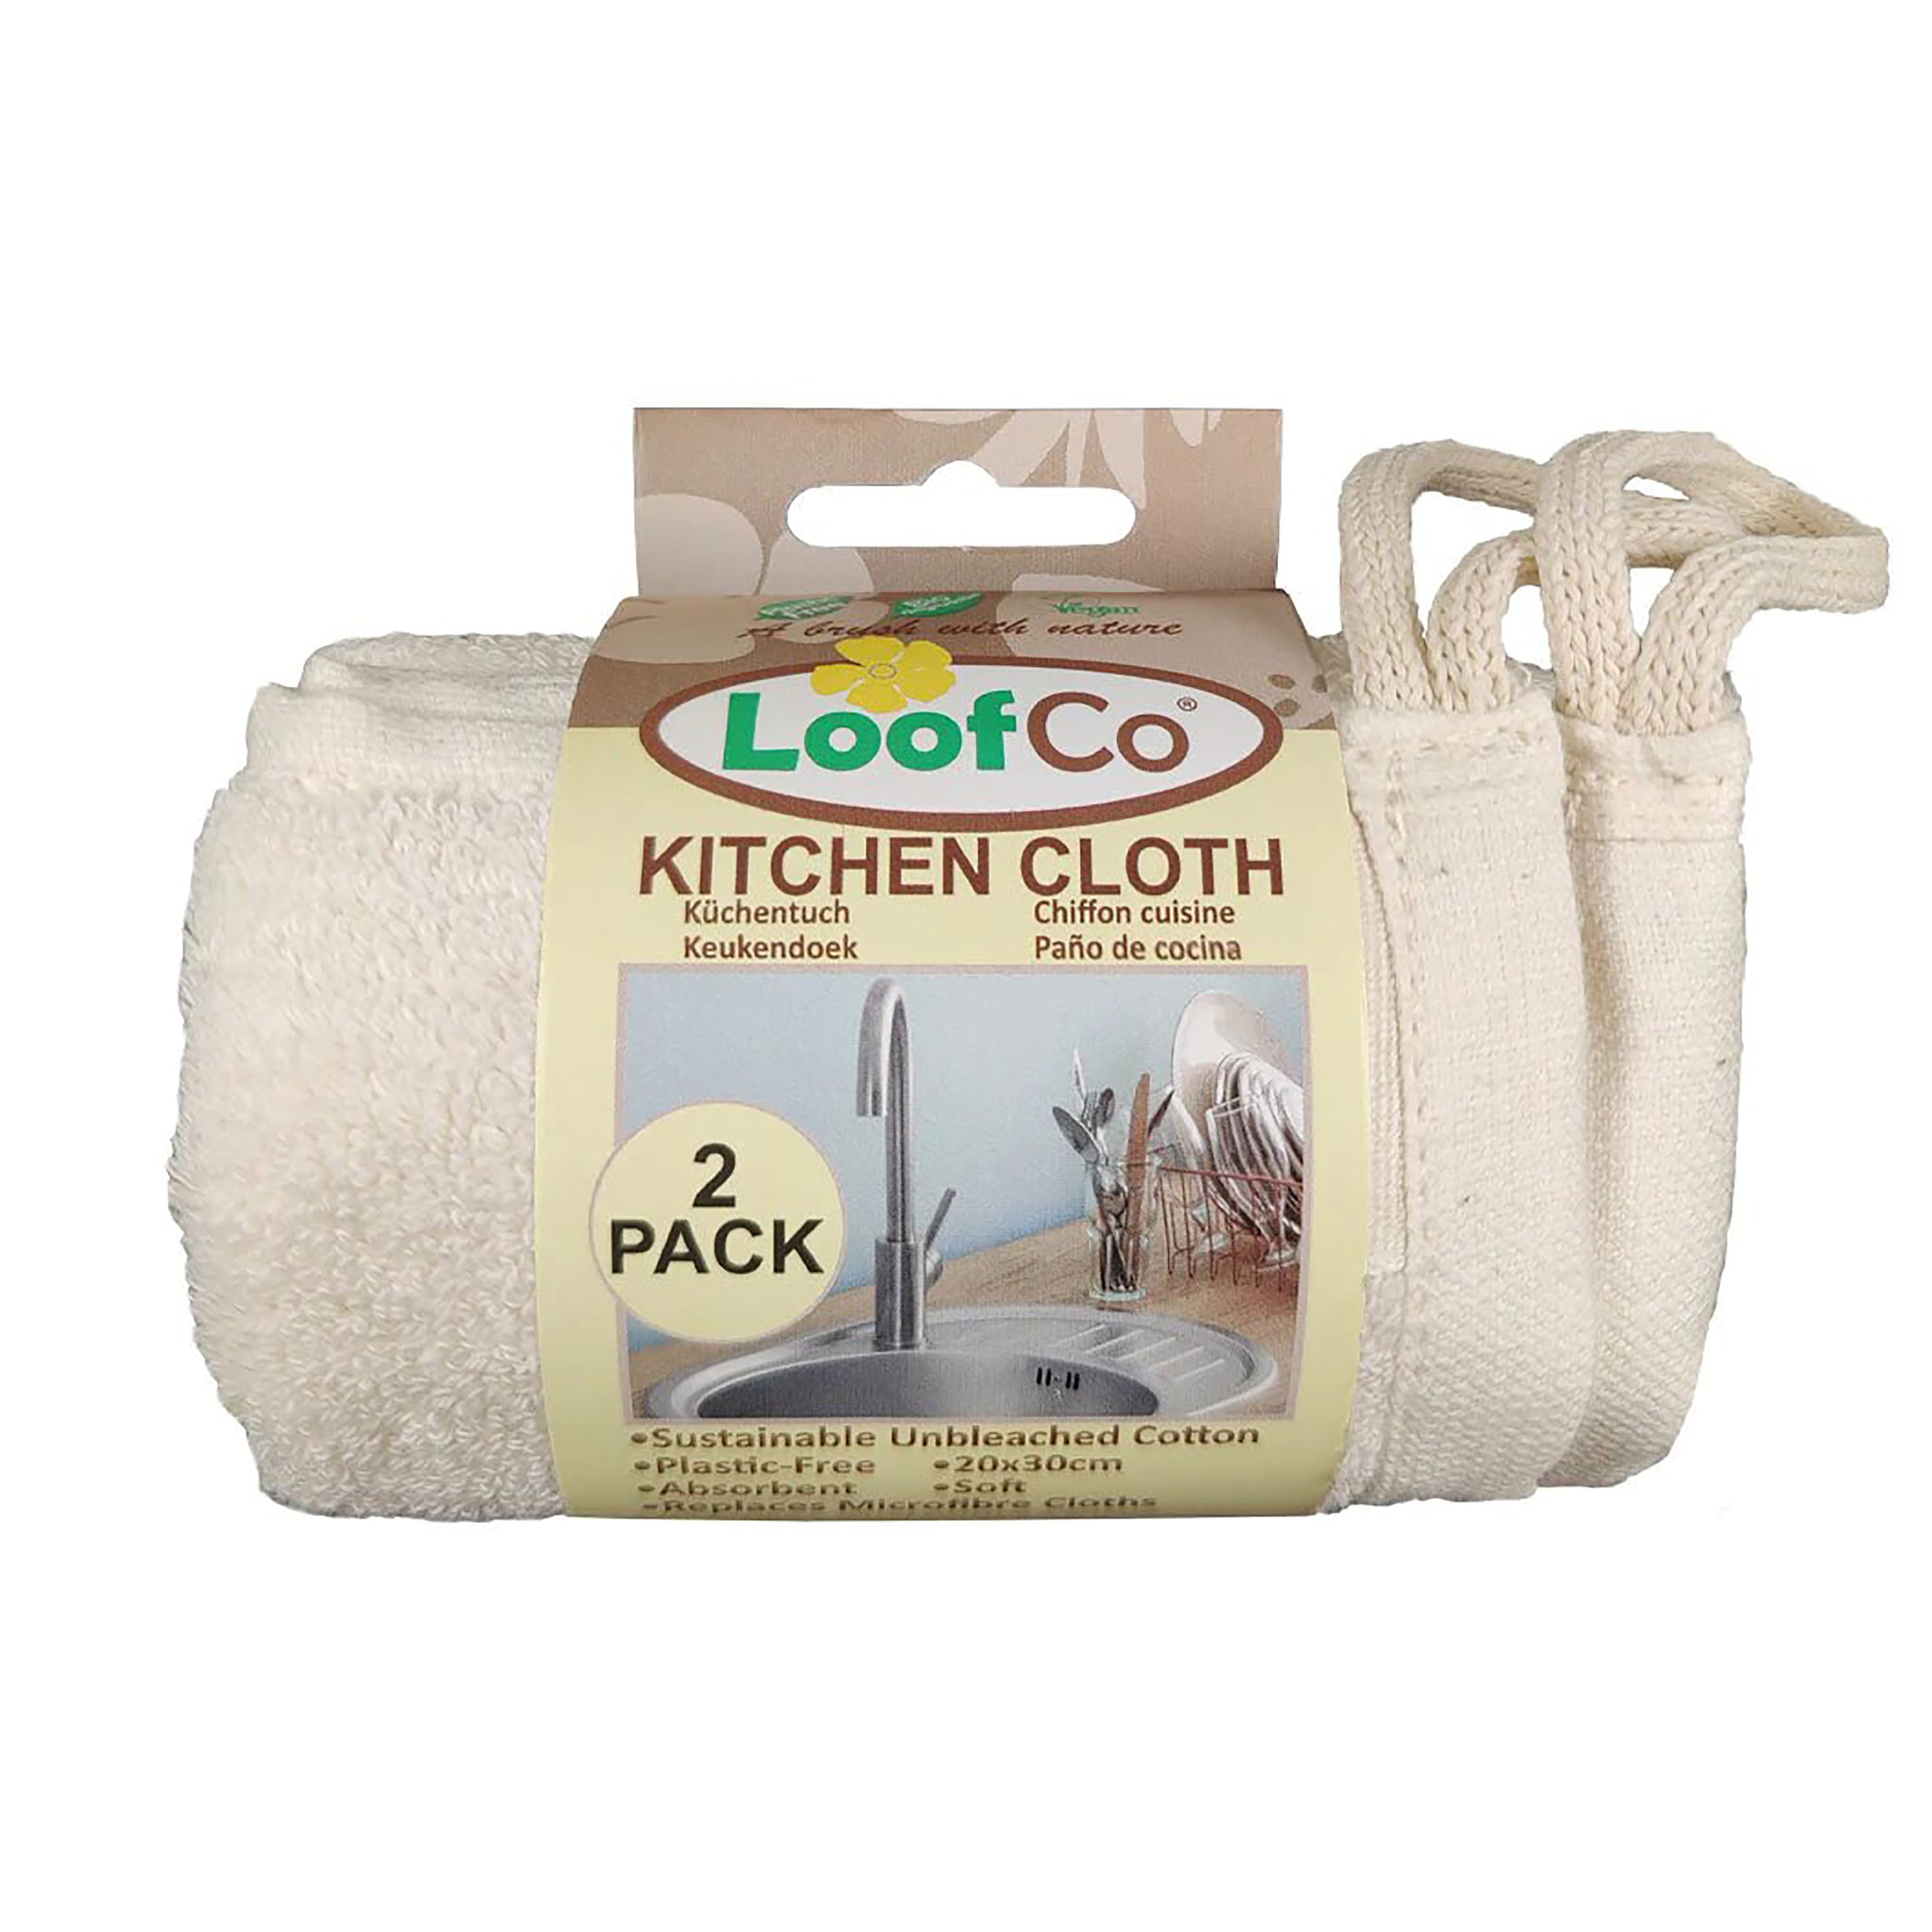 LoofCo Kitchen Cloth 2 Pack